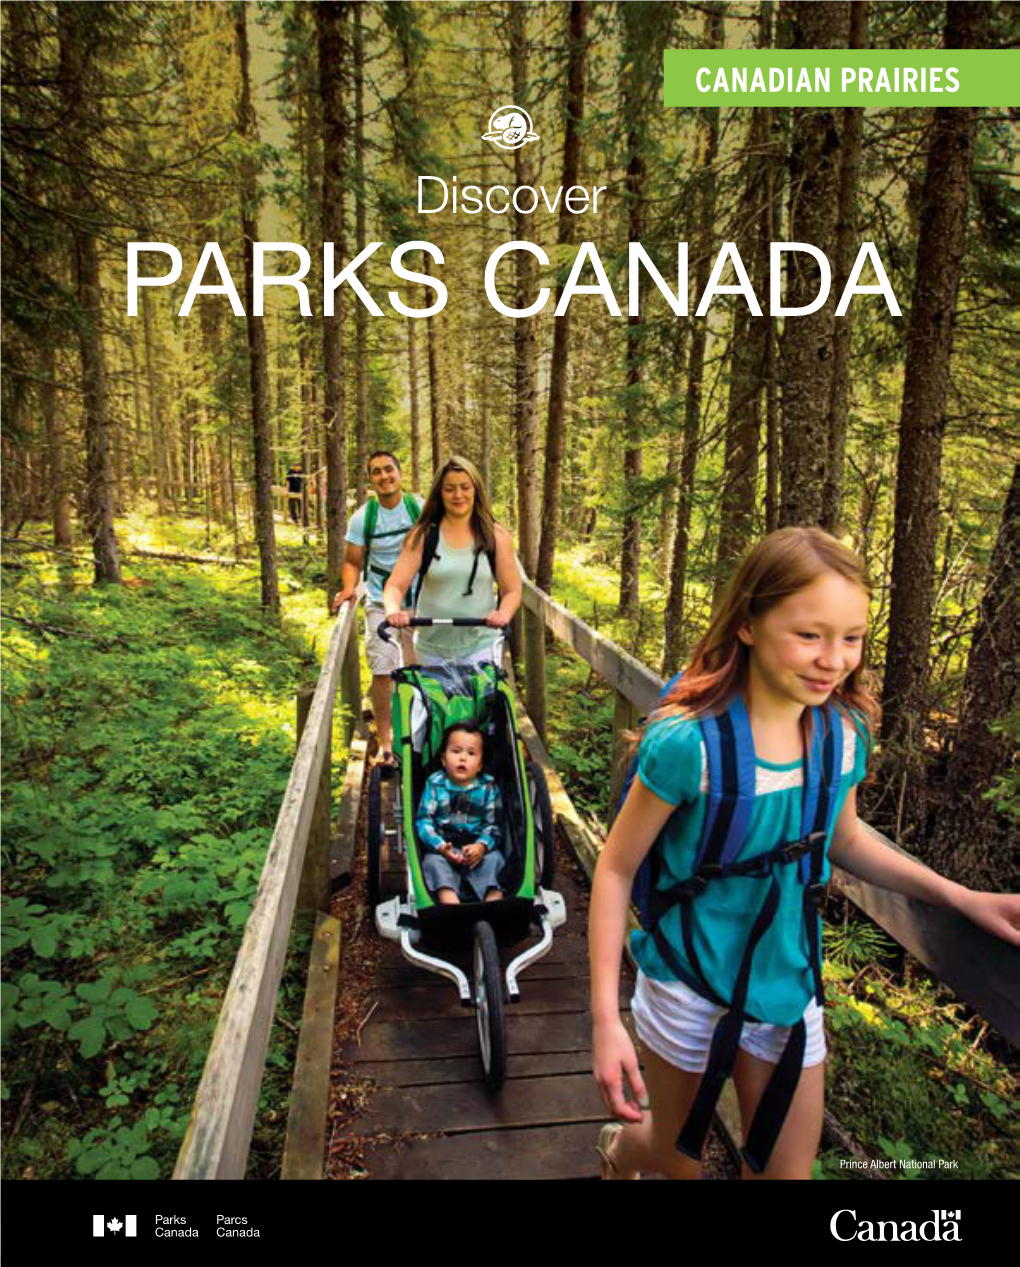 Discover Parks Canada in the Canadian Prairies